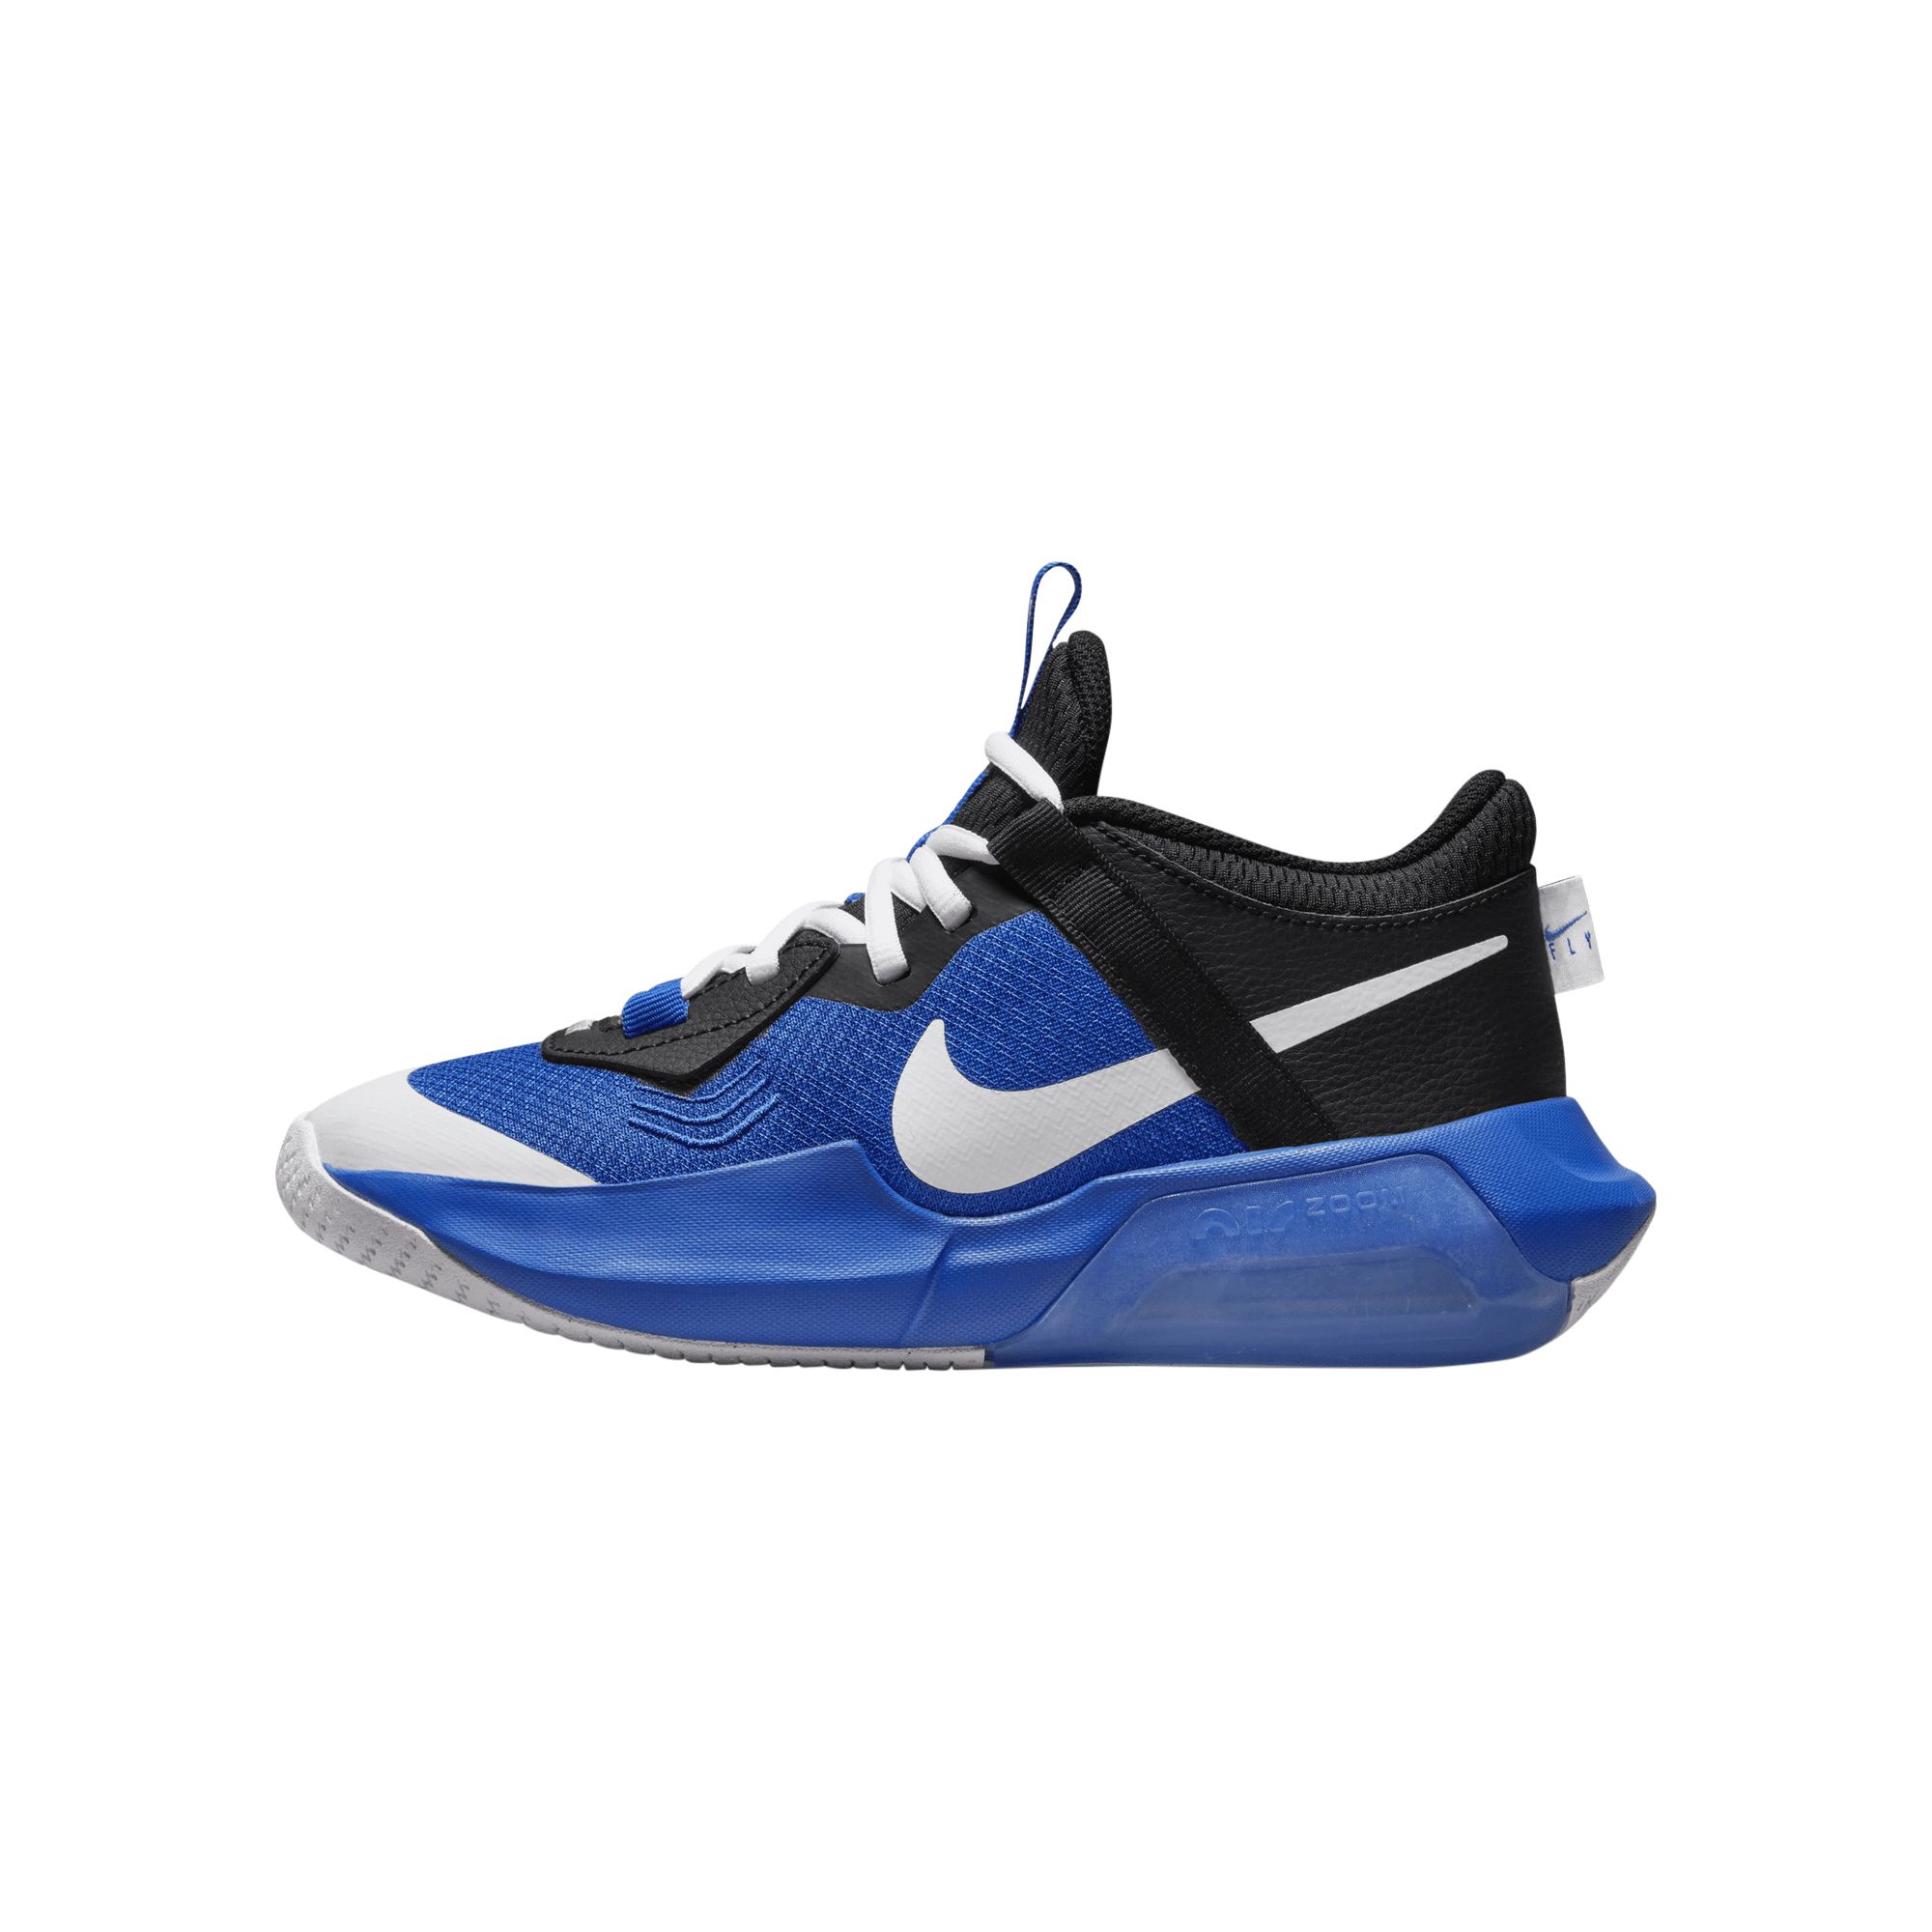 Air zoom crossover gs